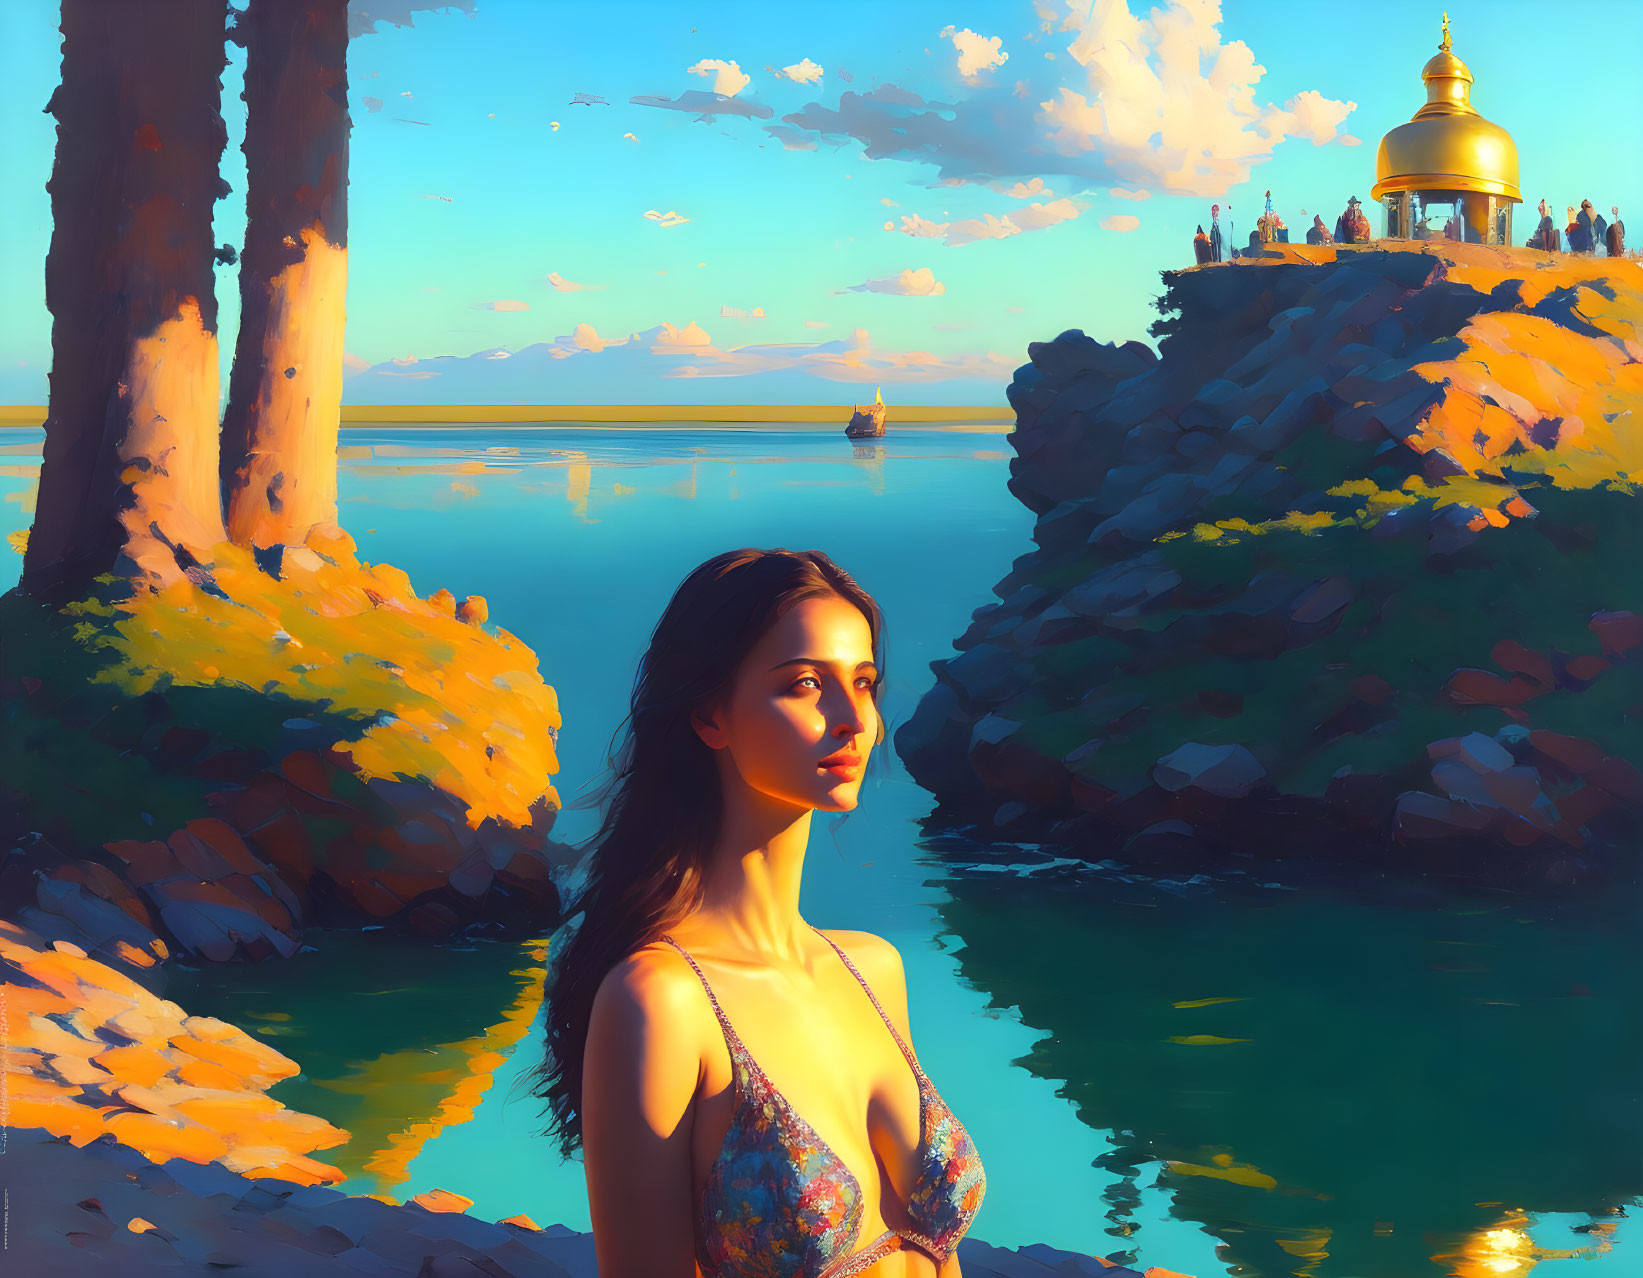 Girl in the style of a painting by Kuindzhi